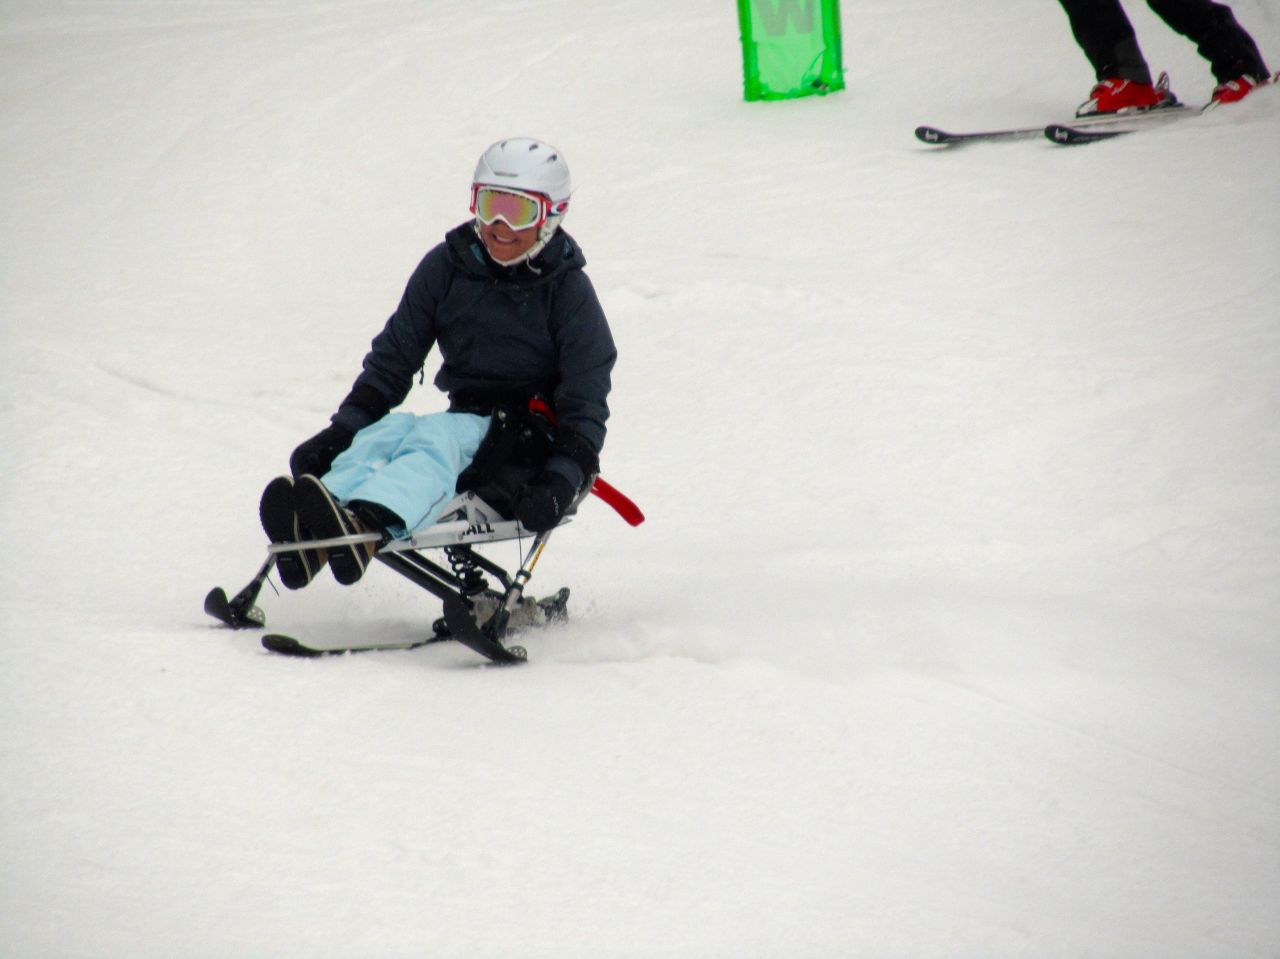 One such challenge for the Minnesota-native was to get back on the slopes and learn to enjoy winter again, which she did with the help of a mono-ski at Stratton Mountain in Vermont. "Its been fun to be out there on the snow again and not be confined to four wheels," Weggemann told CNN.